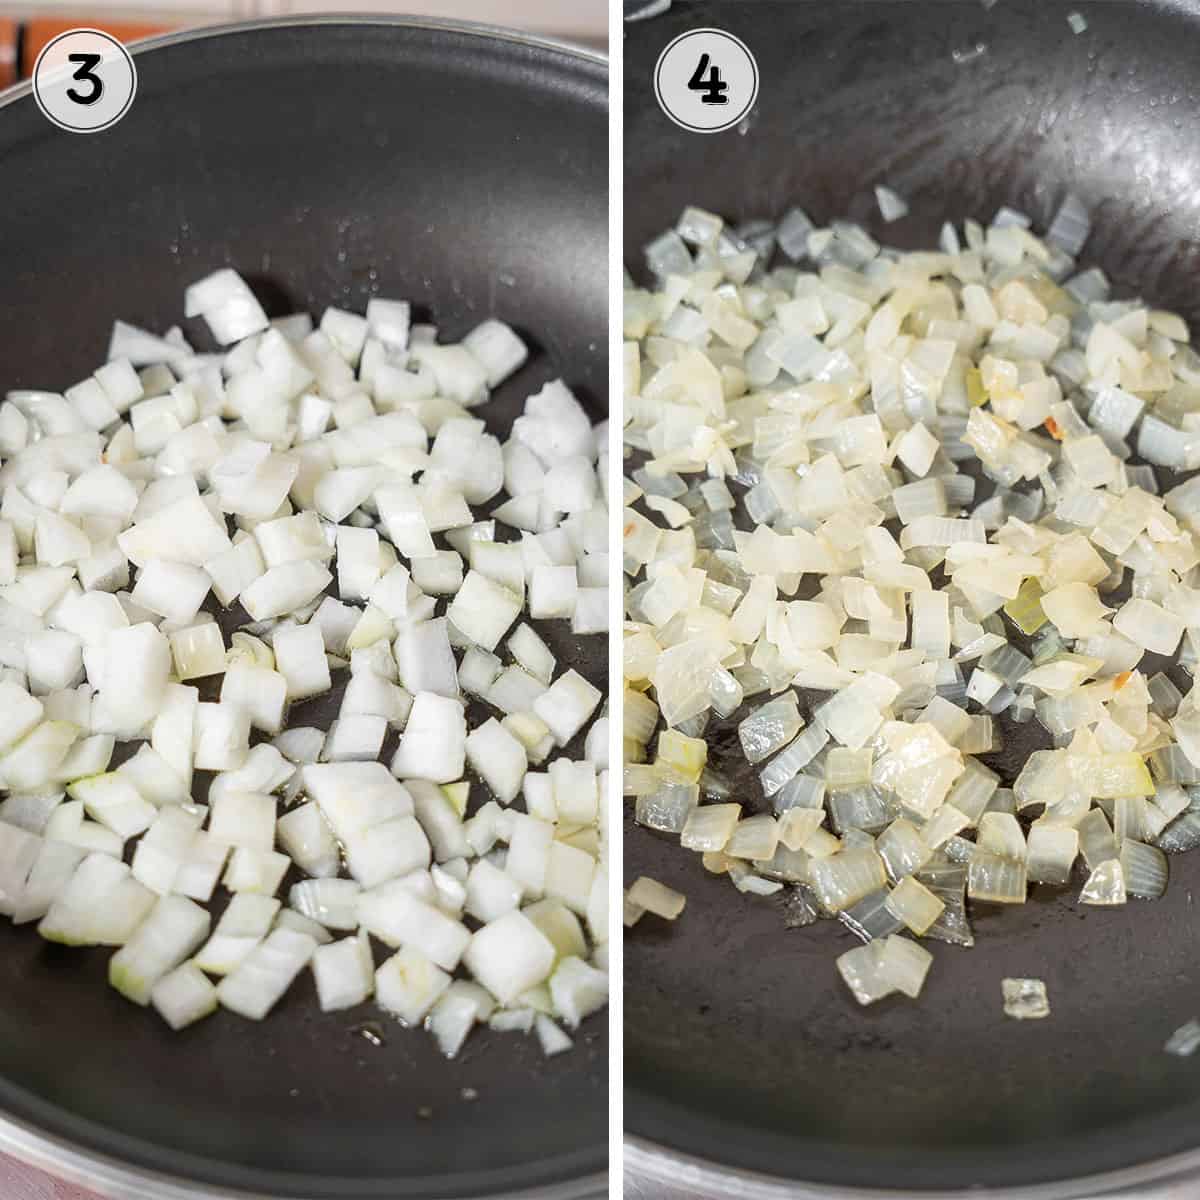 diced onions before and after sautéeing.